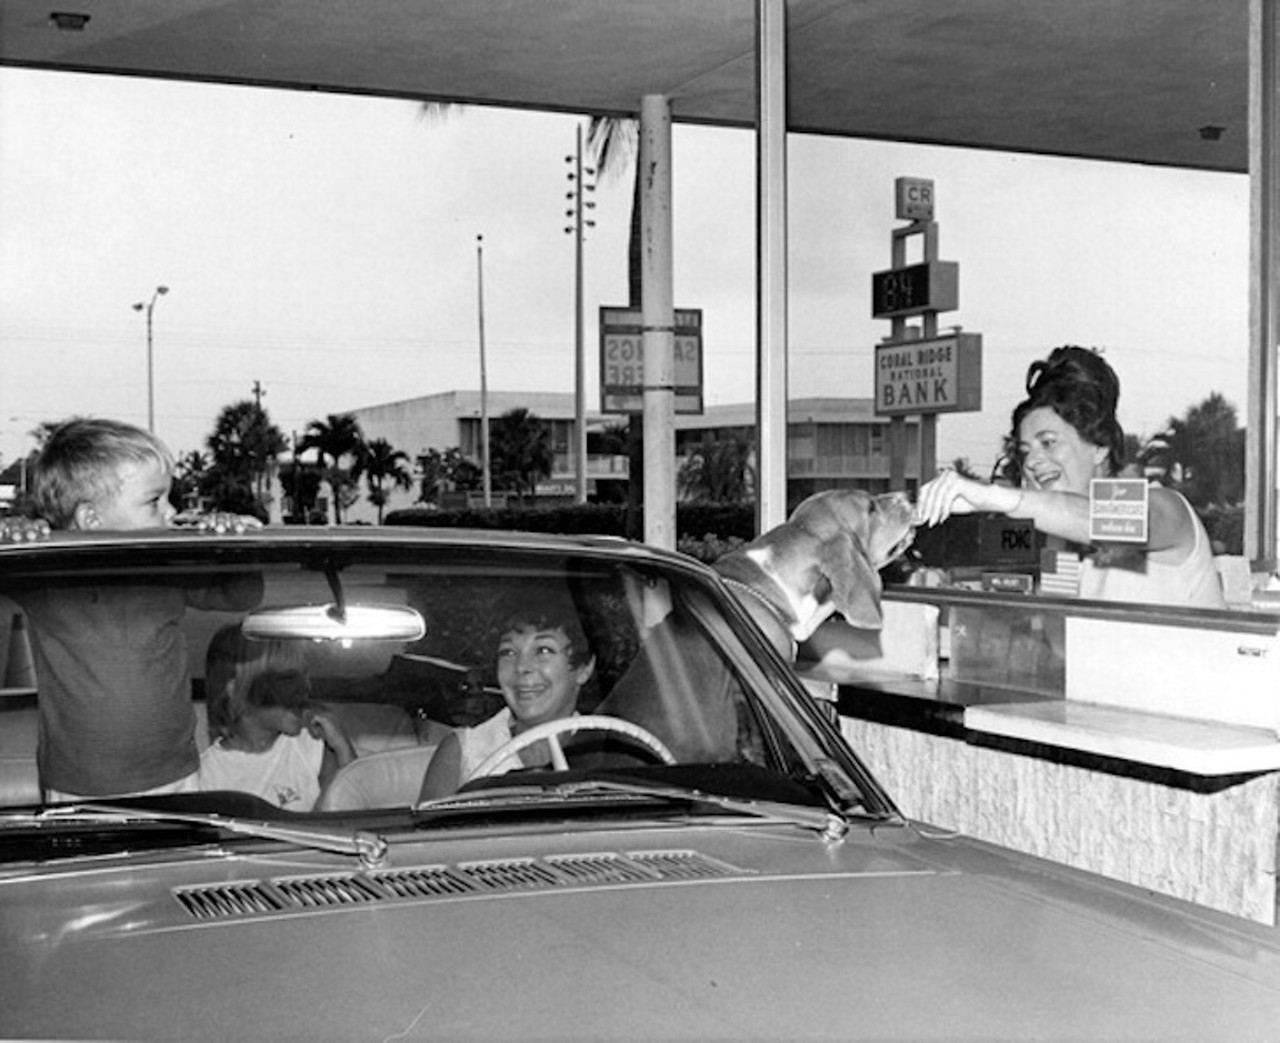 A dog receiving a treat at the Coral Ridge National Bank drive thru window in Fort Lauderdale, Florida, taken around 1969.